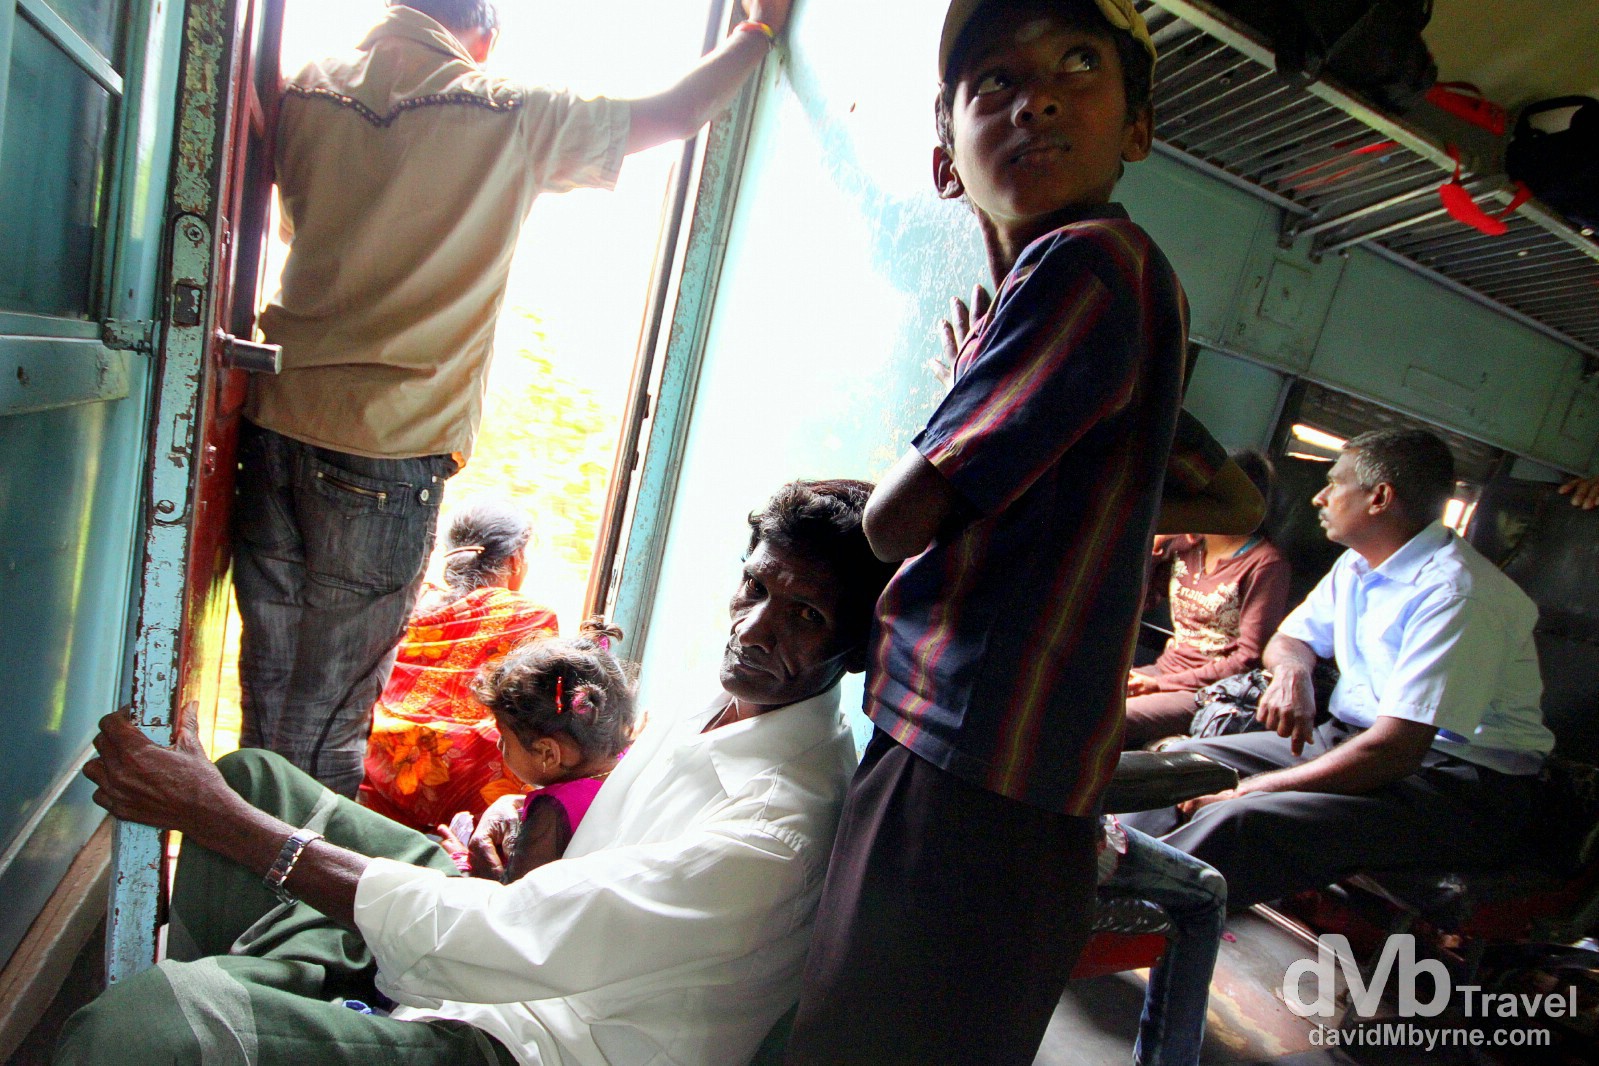 On the Kandy-bound train in central Sri Lanka. September 7th 2102. 